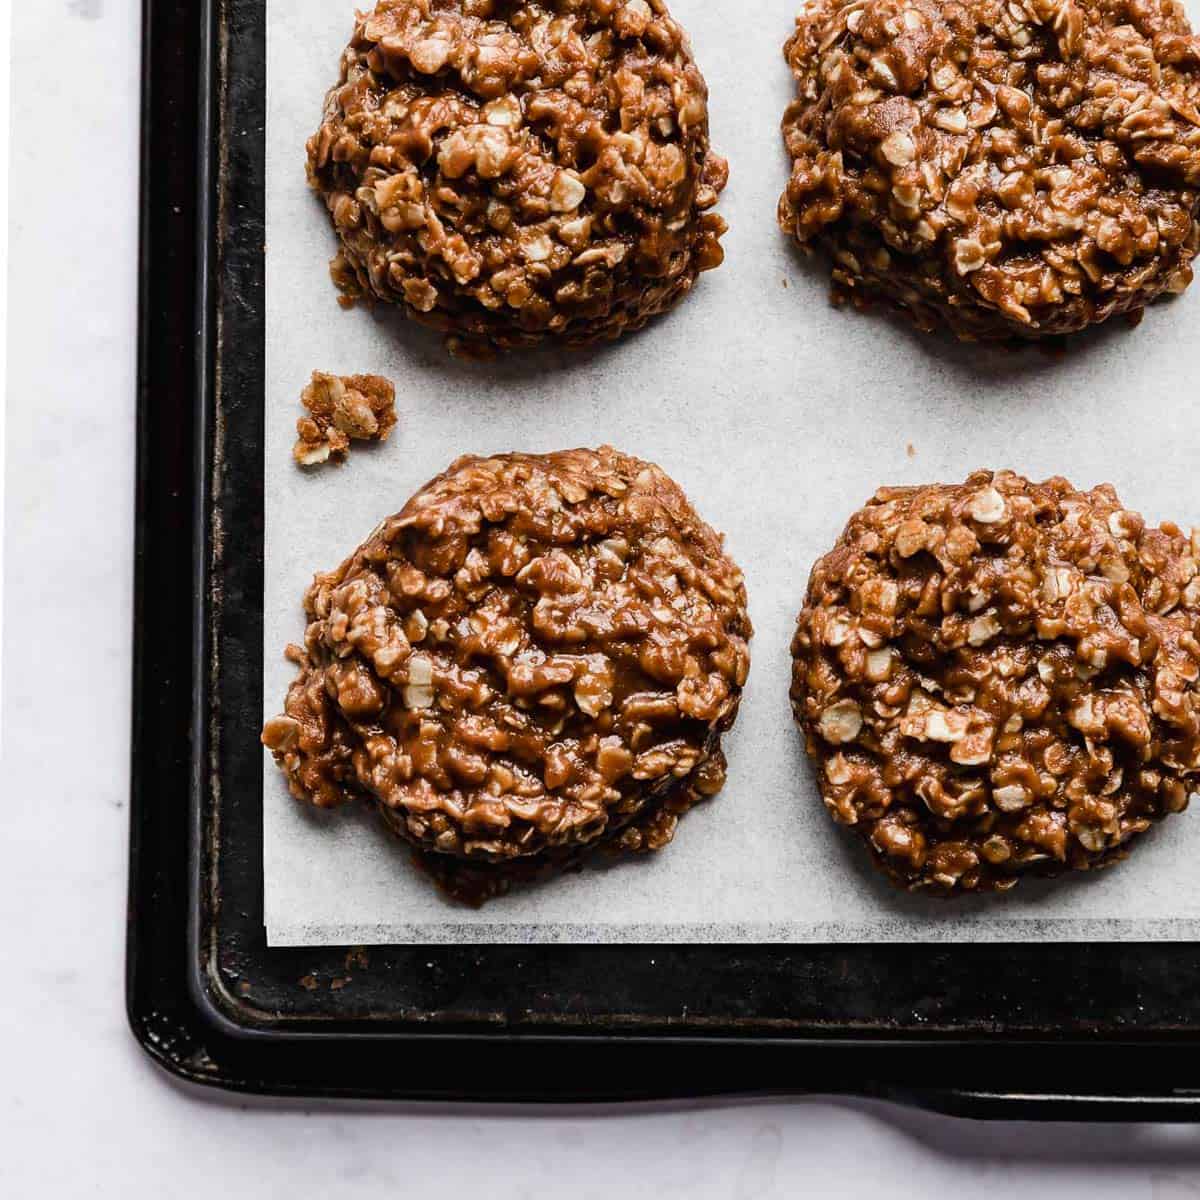 A chocolate peanut butter oatmeal no bake cookie on a white parchment paper.